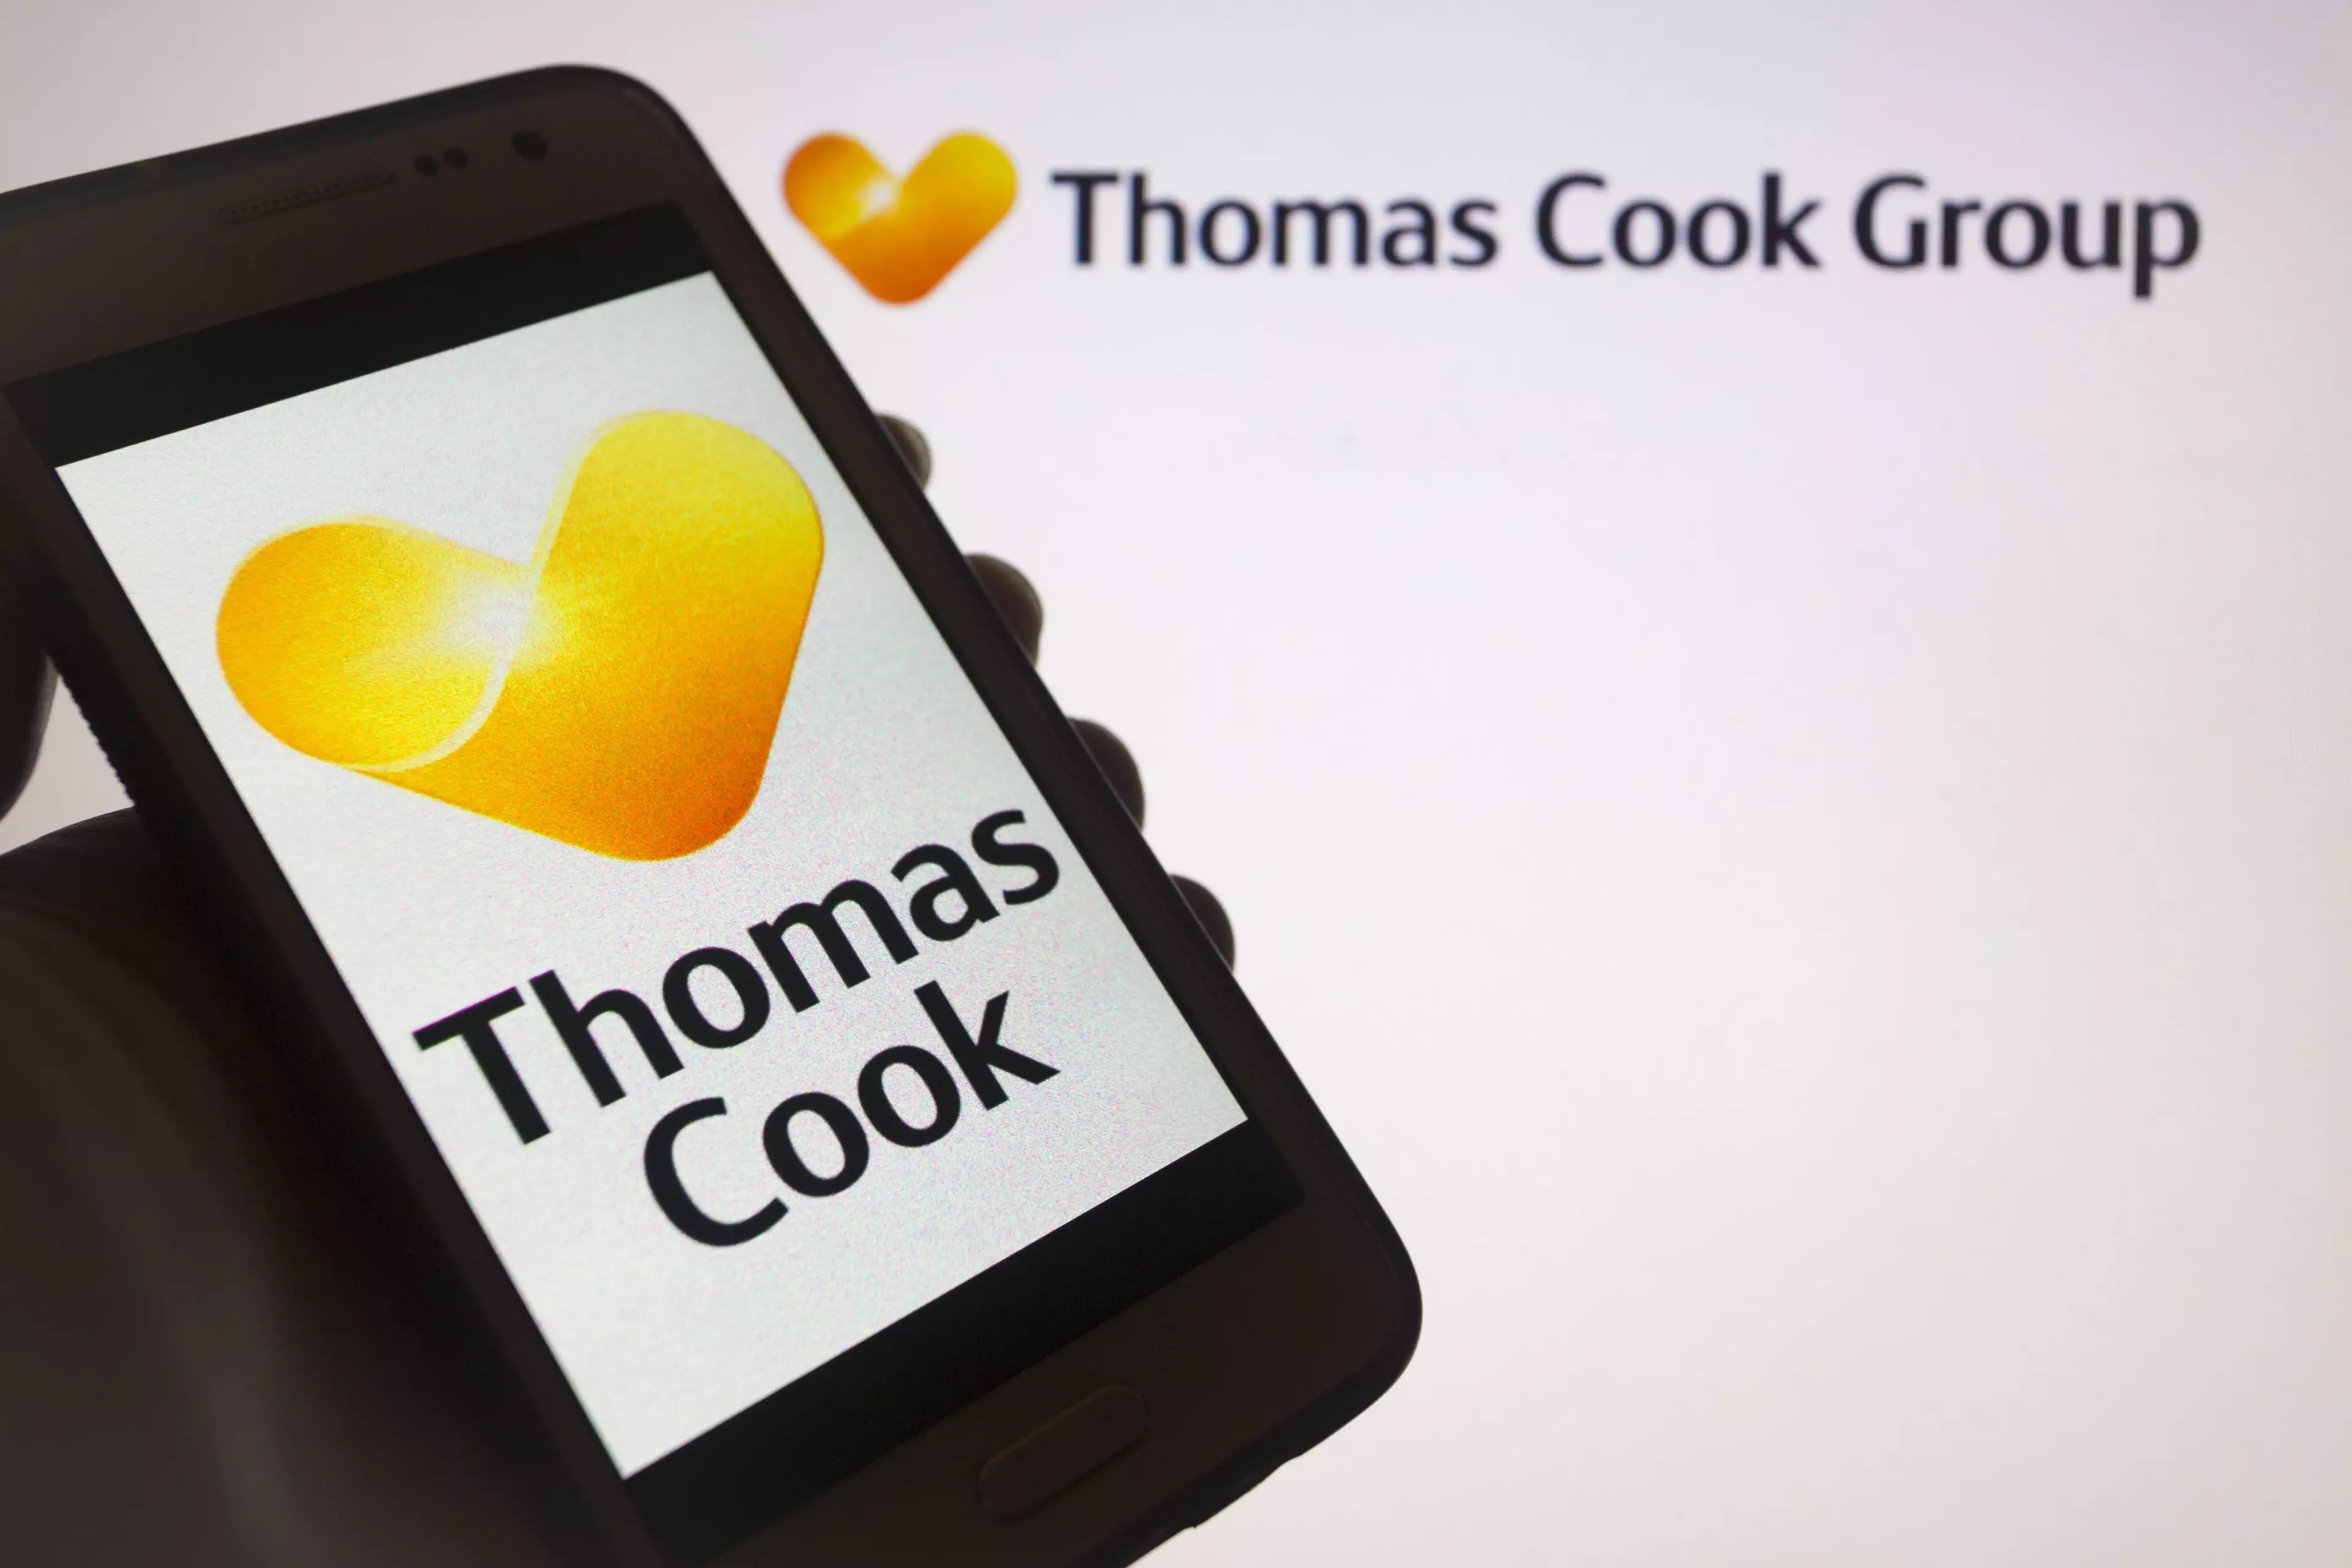 Thomas Cook are currently trying to secure more rescue funds.